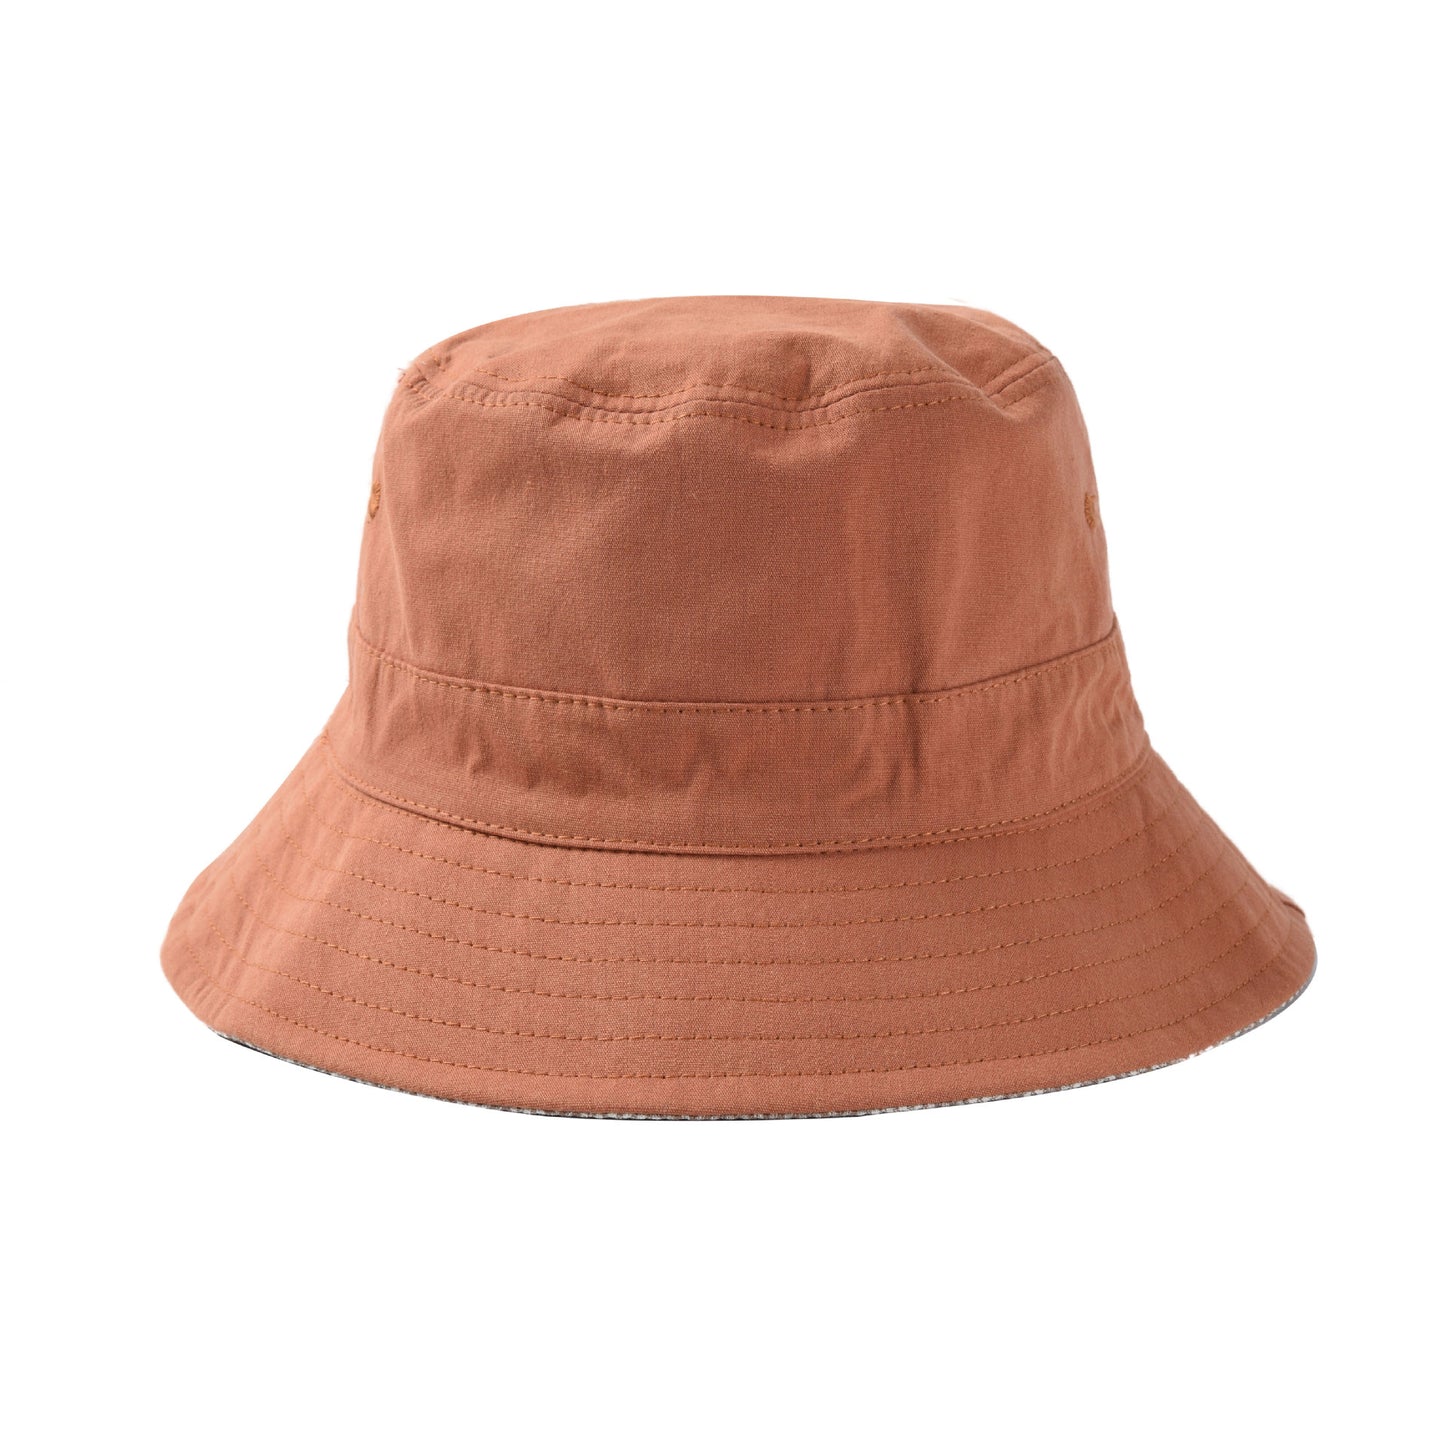 Double-sided fisherman hat